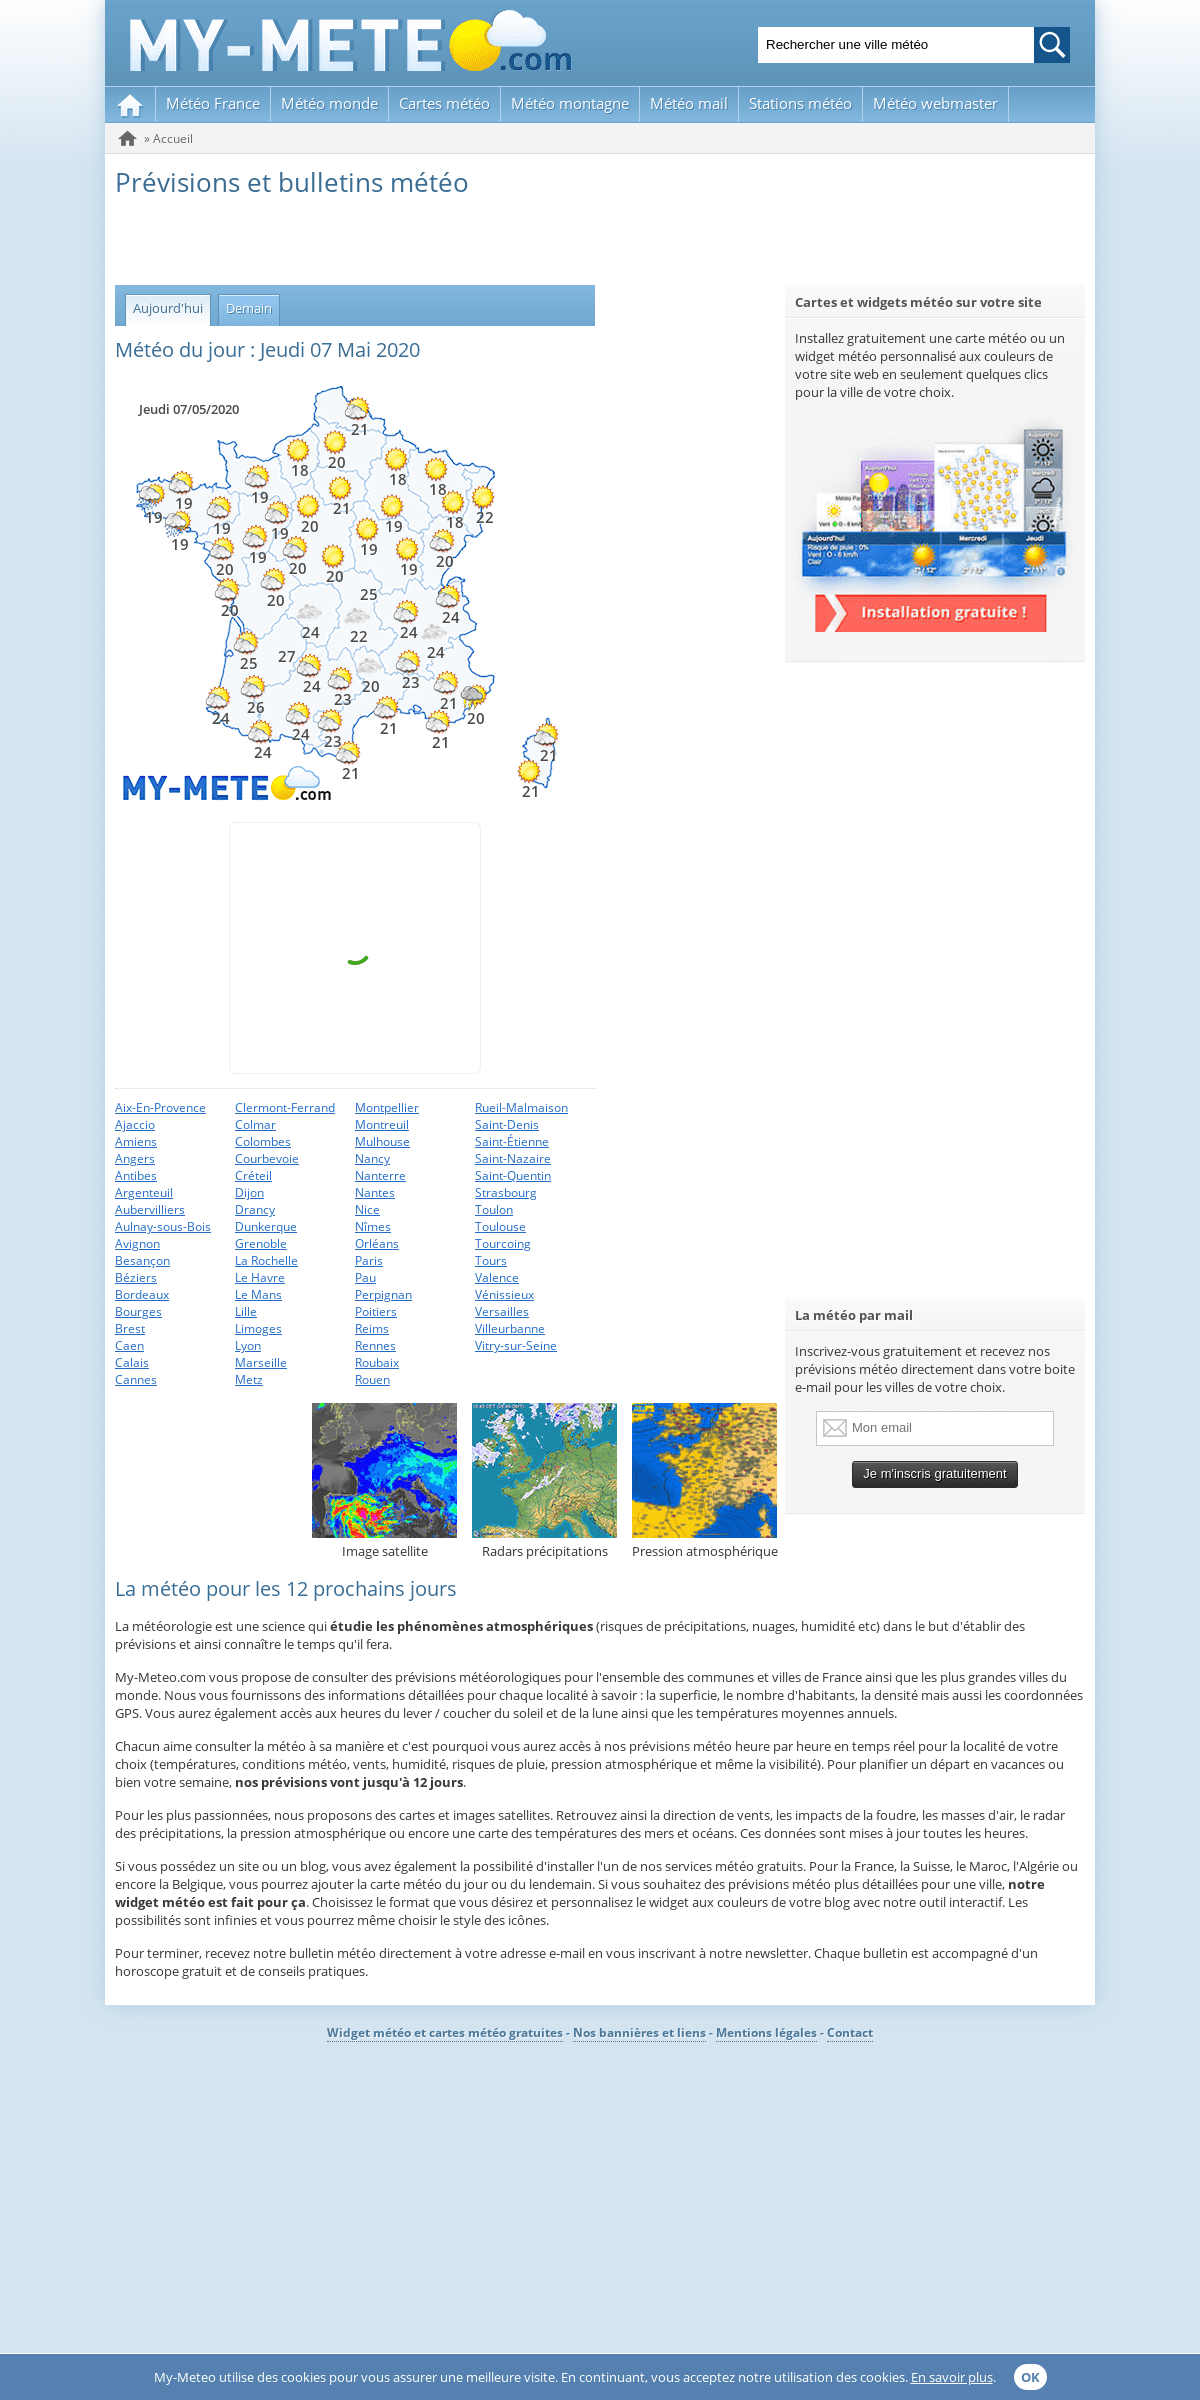 A complete backup of my-meteo.com